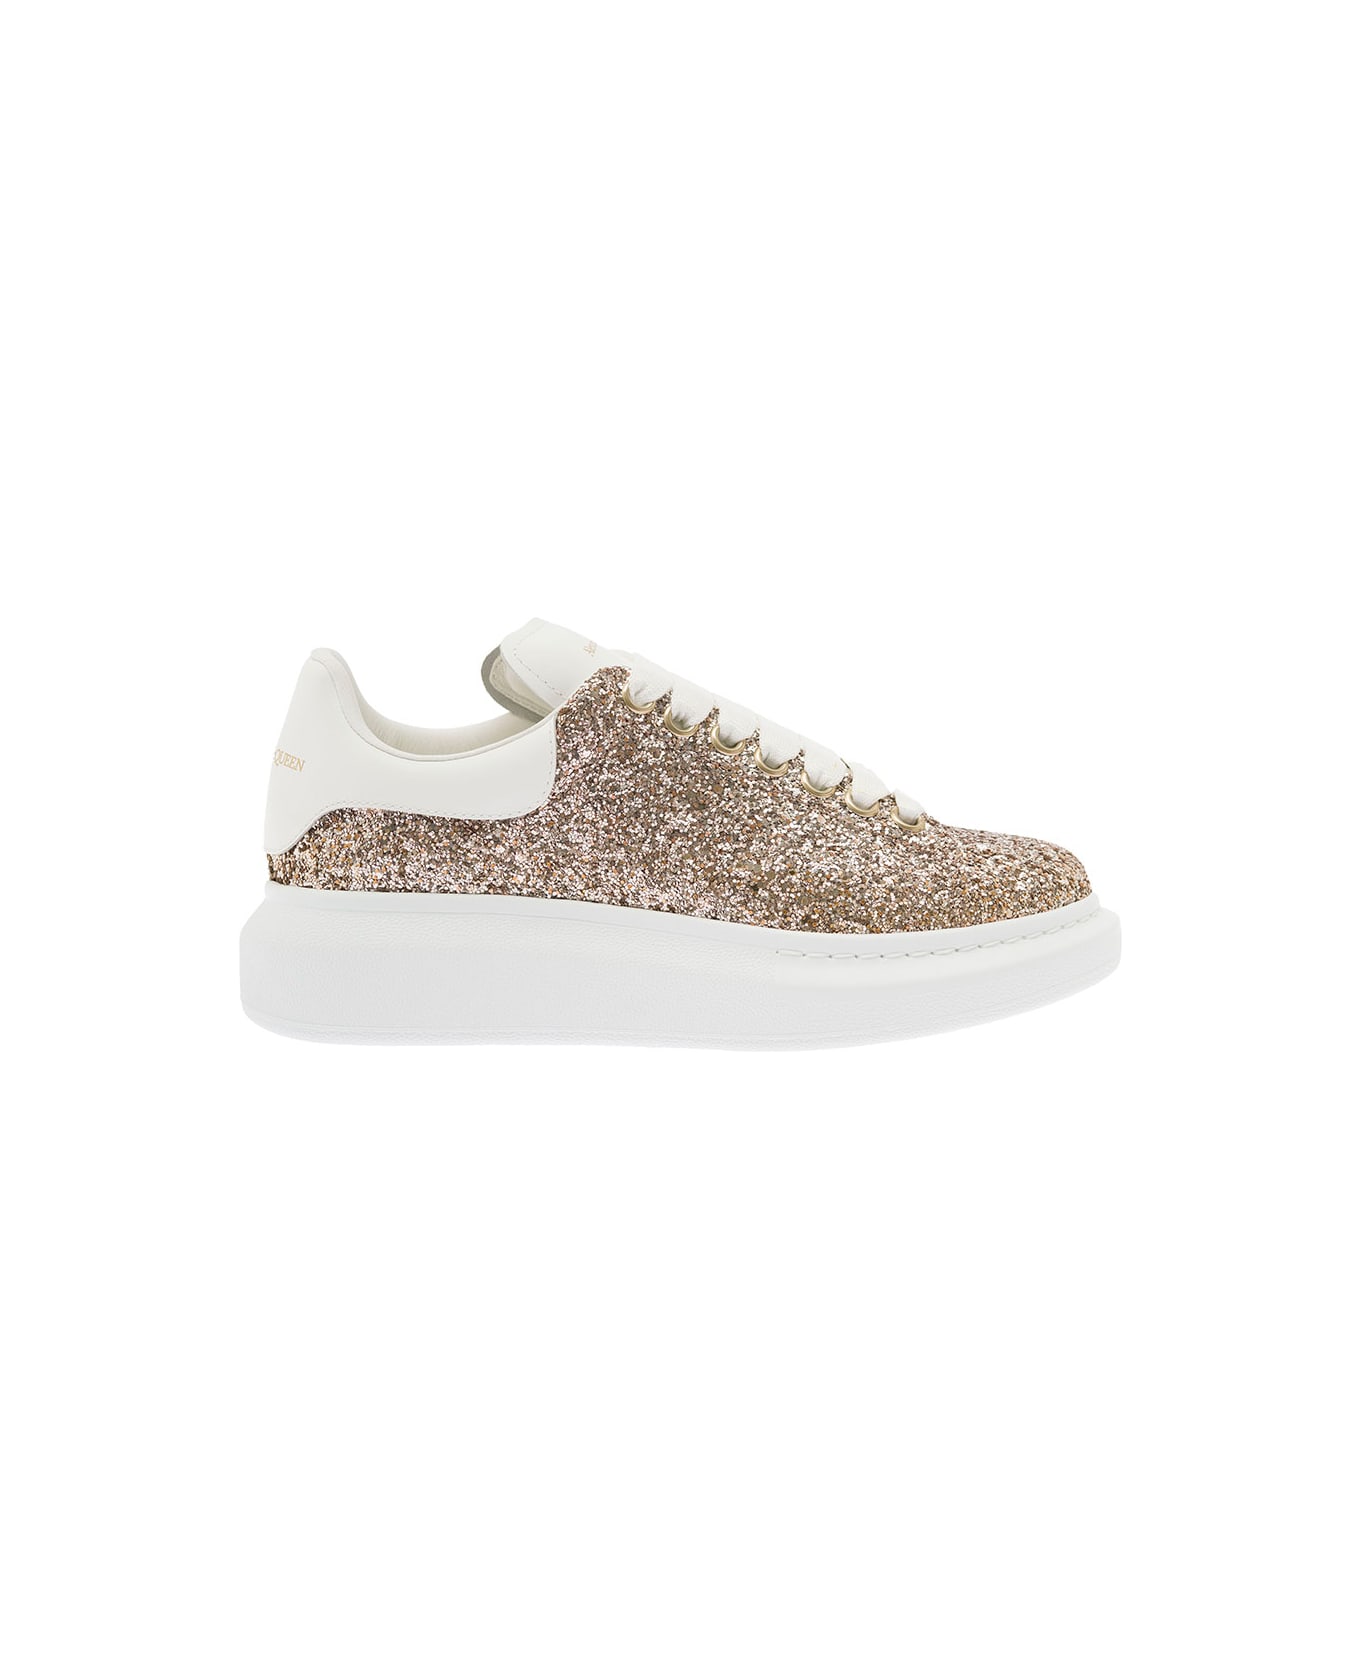 Alexander McQueen Gold-tone 'larry' Sneakers With Glitter Detailing In Polyester Woman - Calico White ウェッジシューズ